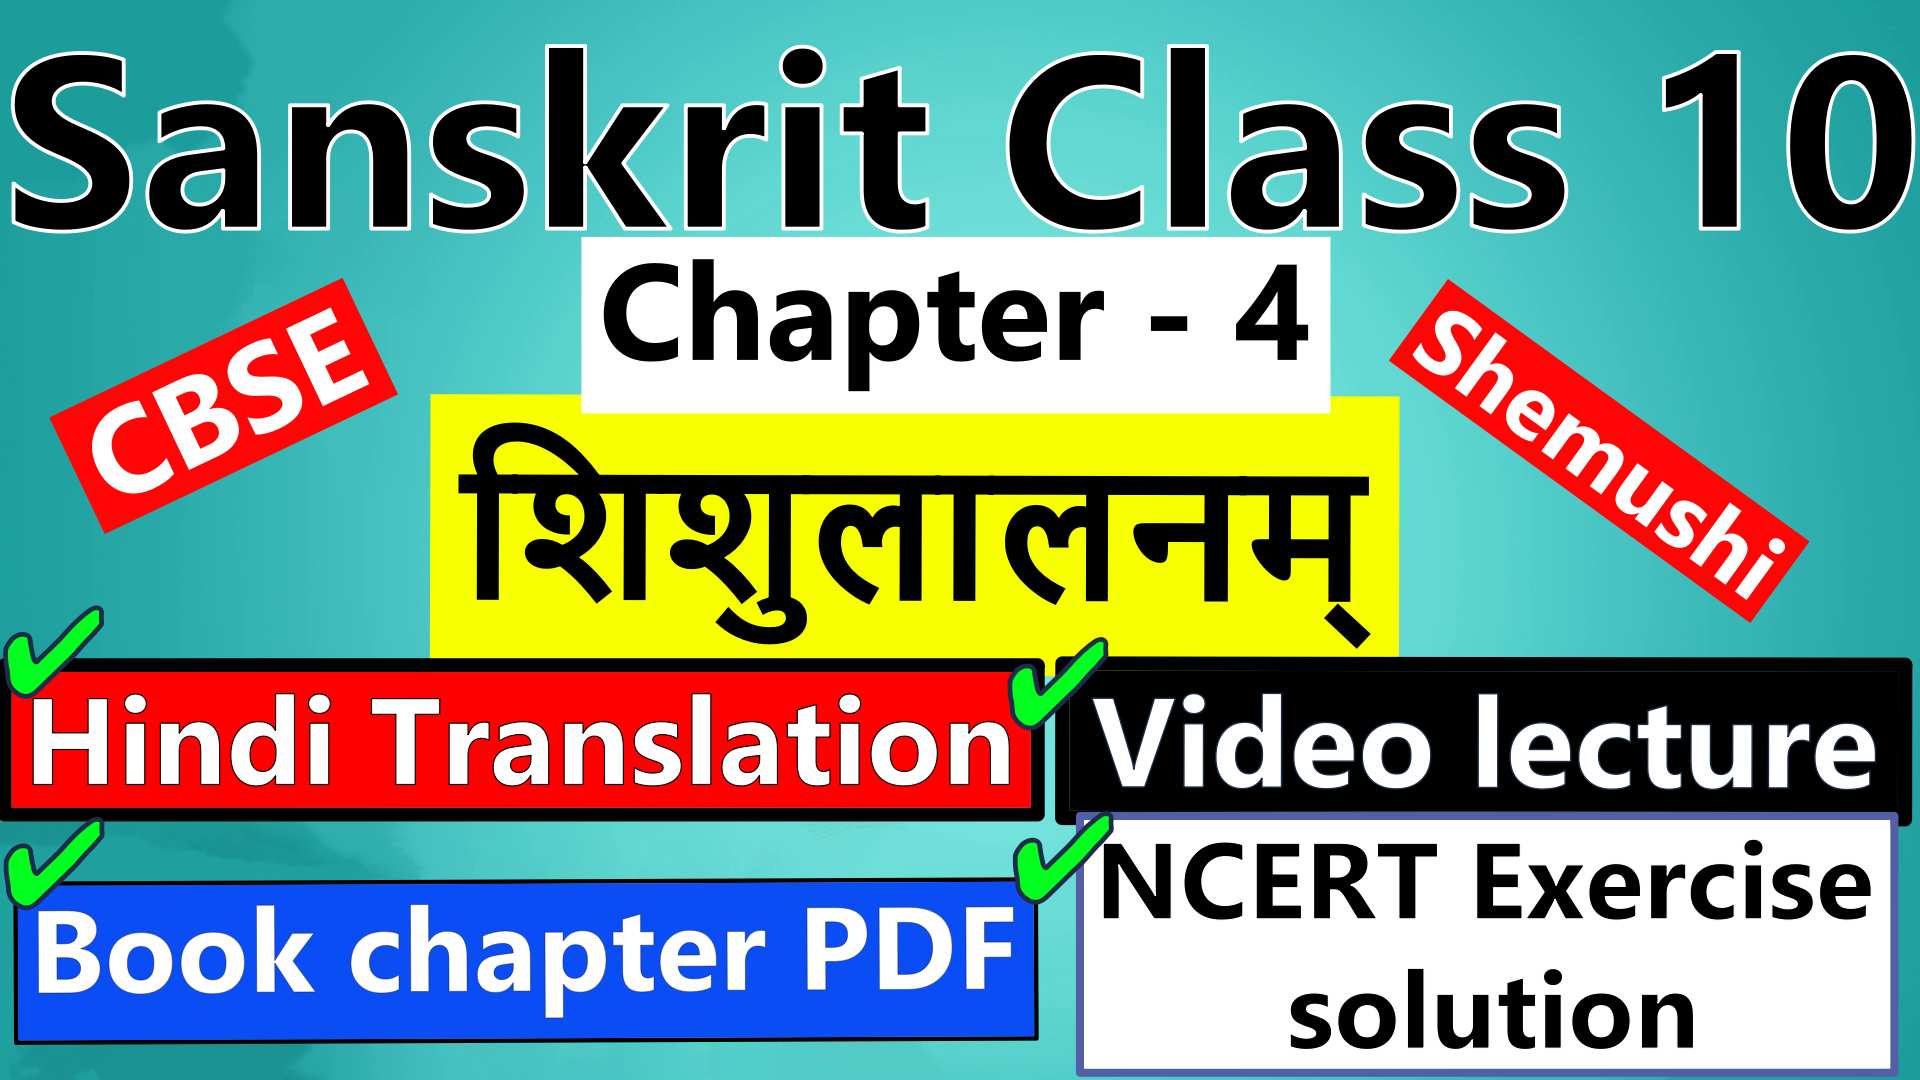 sanskrit-class-10-chapter-4-शिशुलालनम्-Hindi-Translation-Video-lecture-NCERT-Exercise-Solution-Question-Answer-Book-chapter-PDF